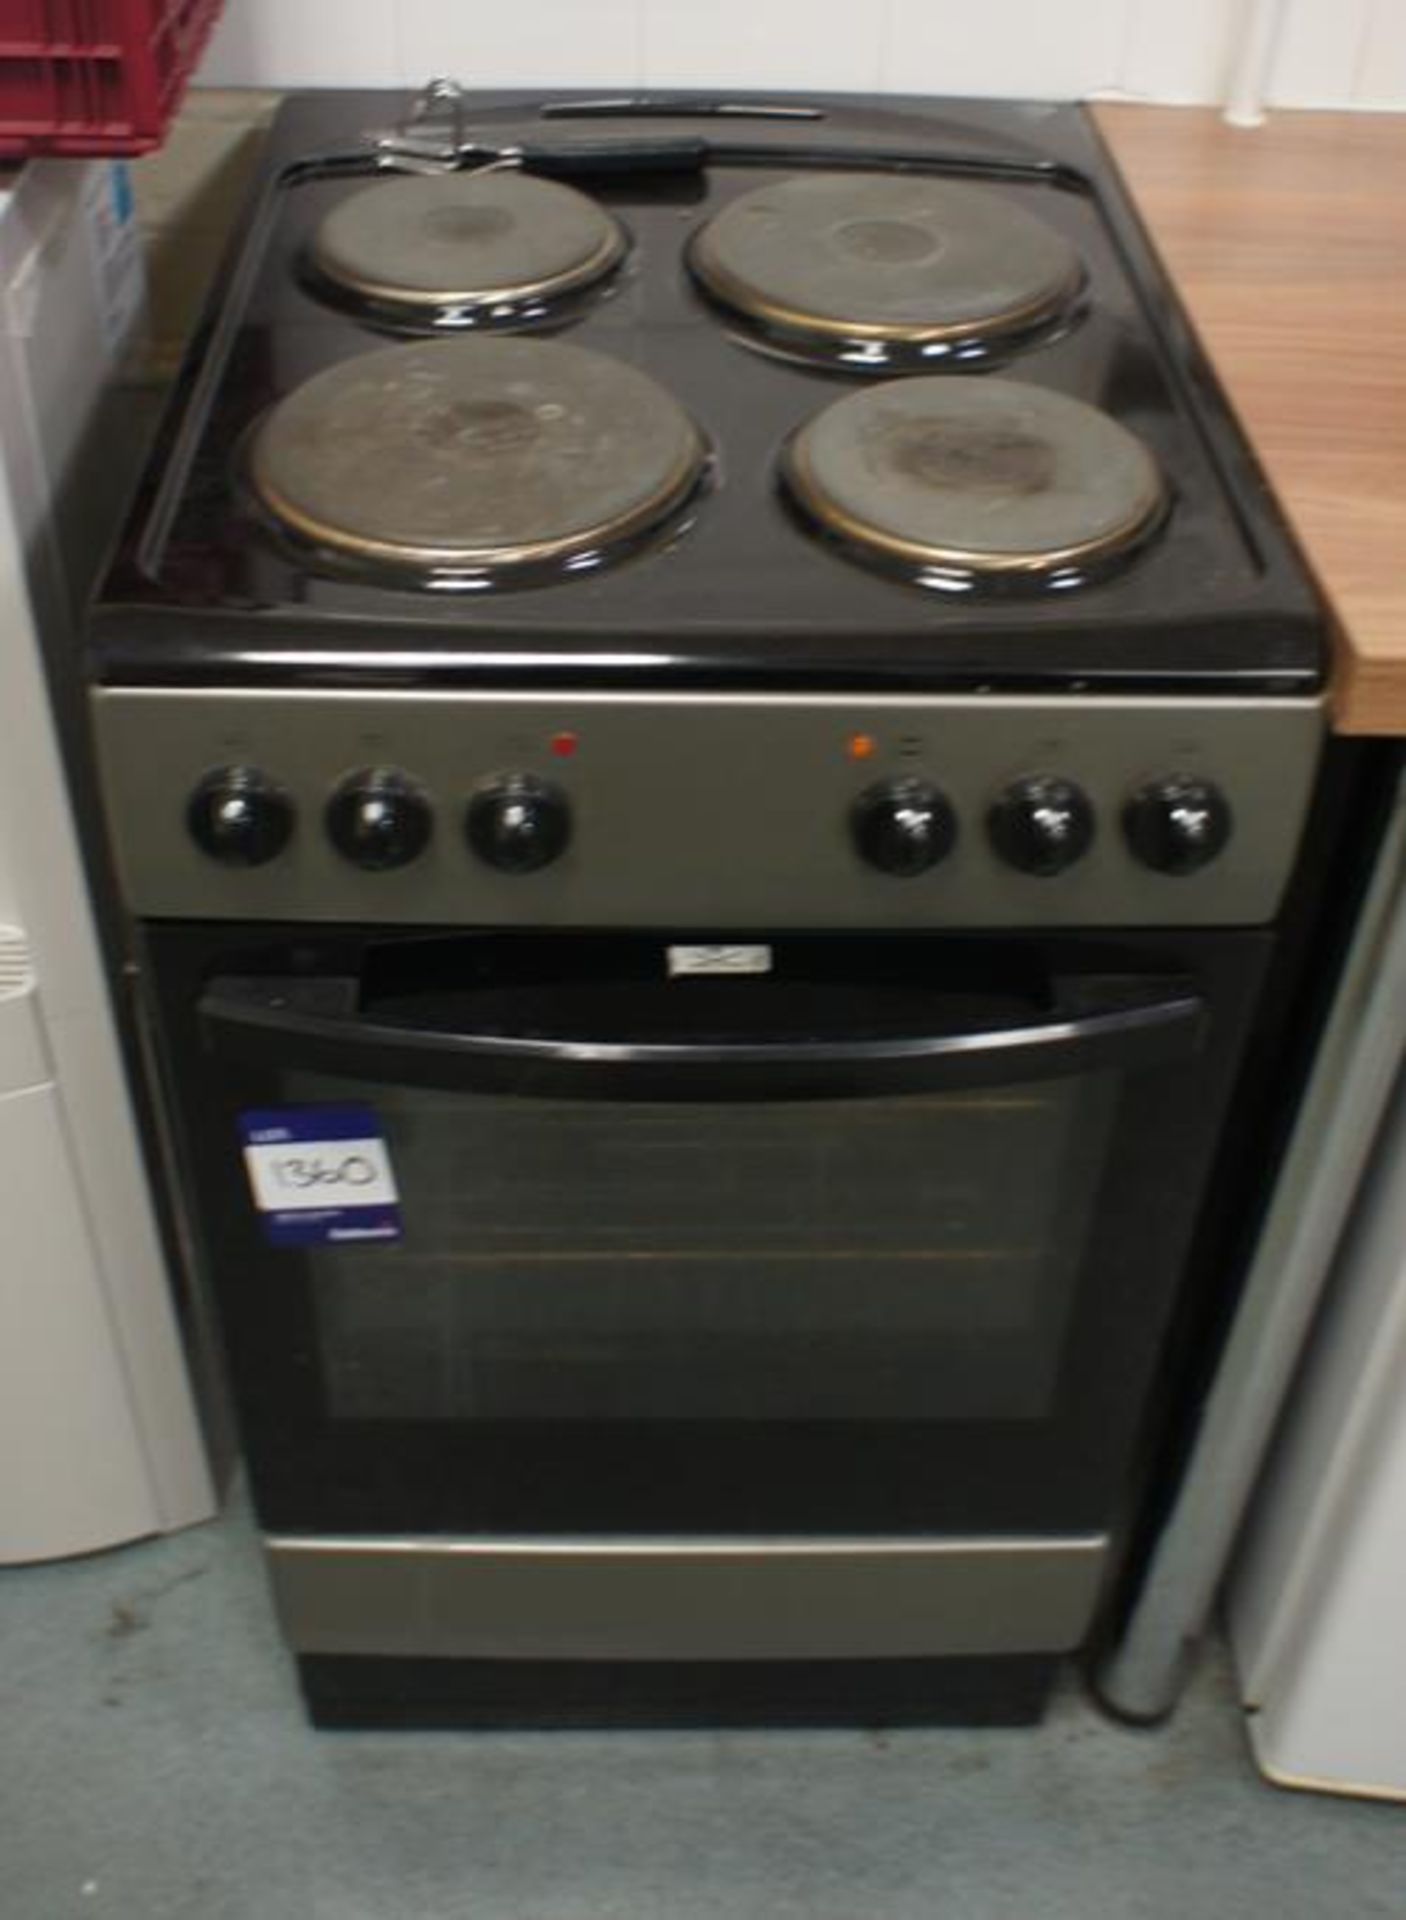 * CFSESV14 Freestanding Electric Oven with Hob Photographs are provided for example purposes only - Image 2 of 3